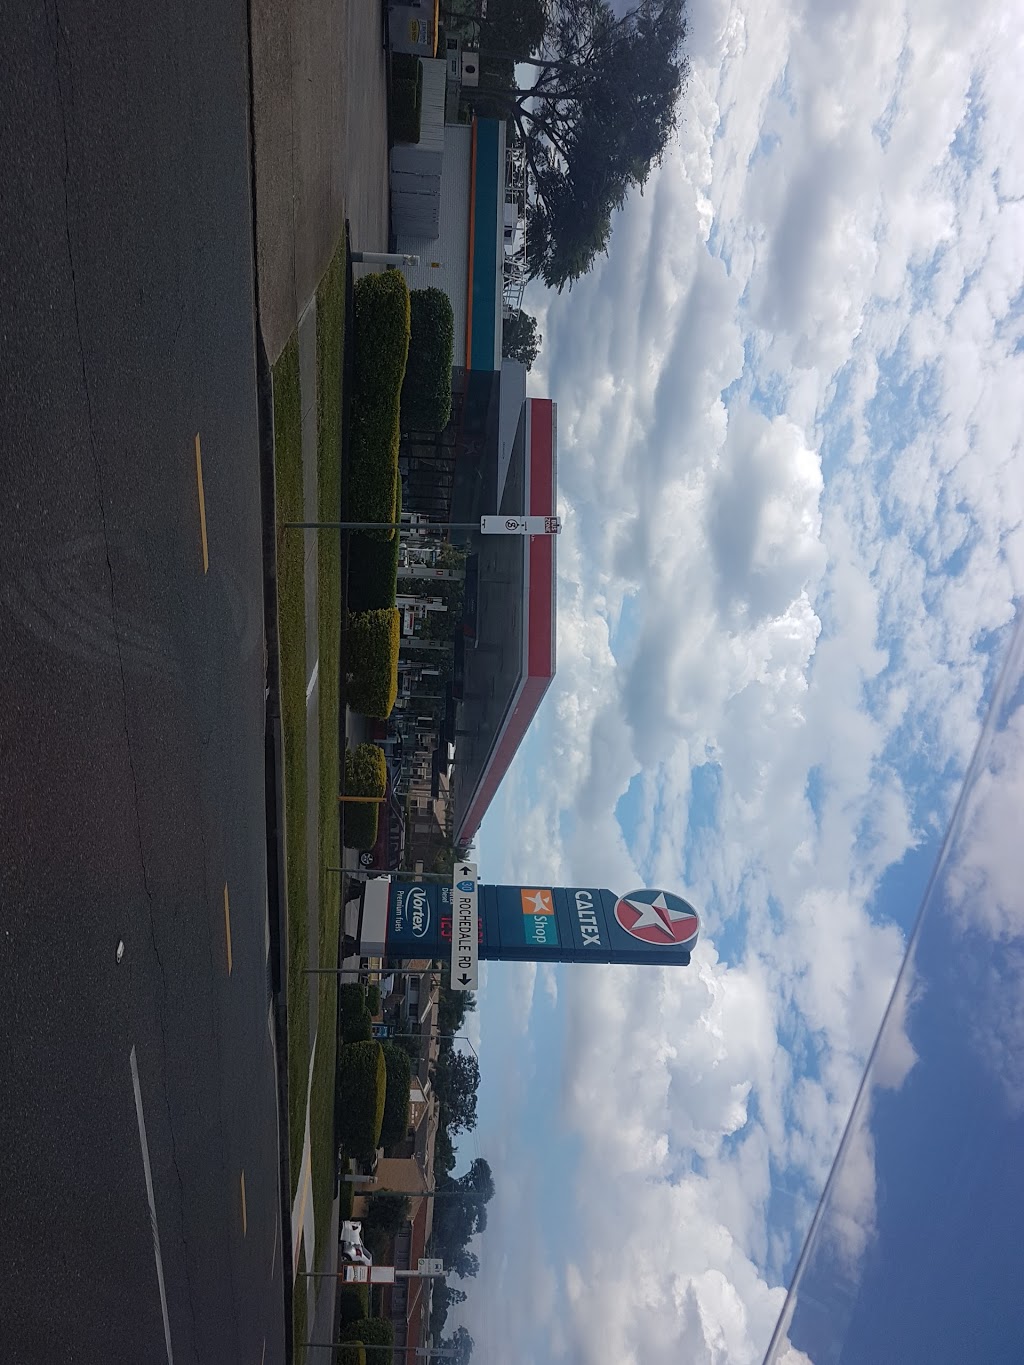 Caltex Rochedale | gas station | 720 Underwood Rd, Rochedale South QLD 4123, Australia | 0738413570 OR +61 7 3841 3570